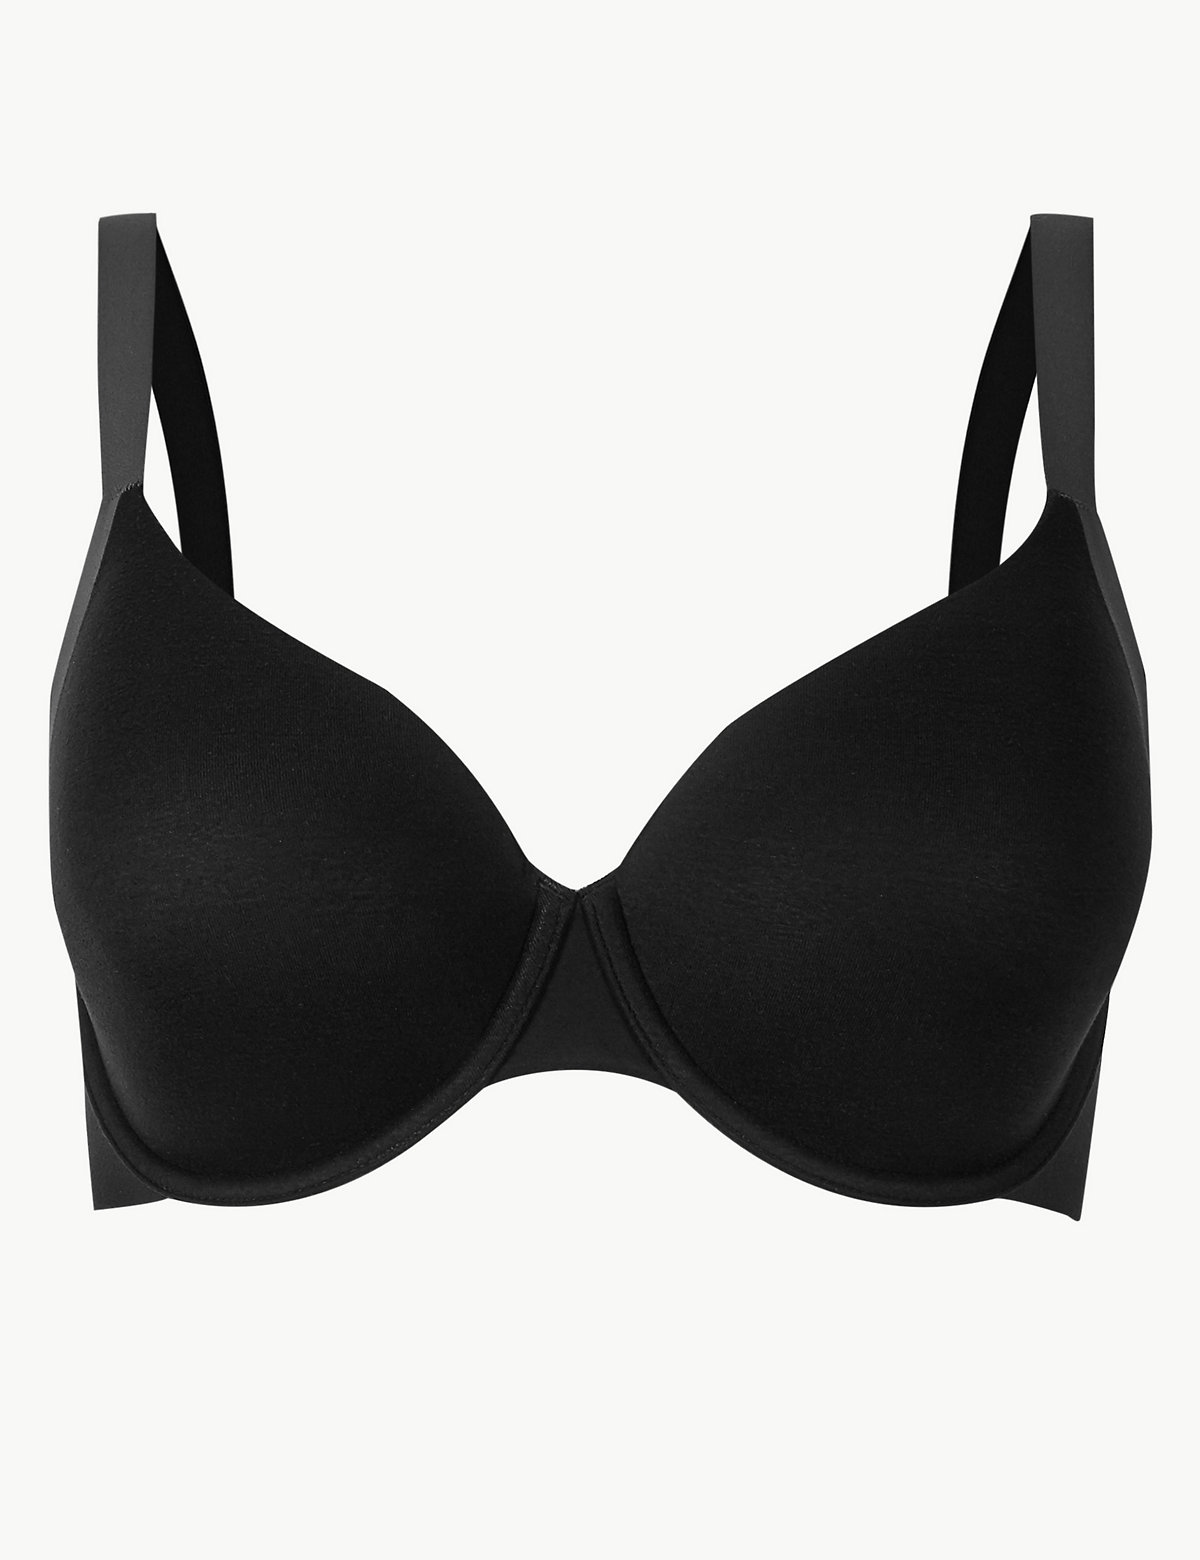 Sumptuously Soft™ Padded Full Cup Bra